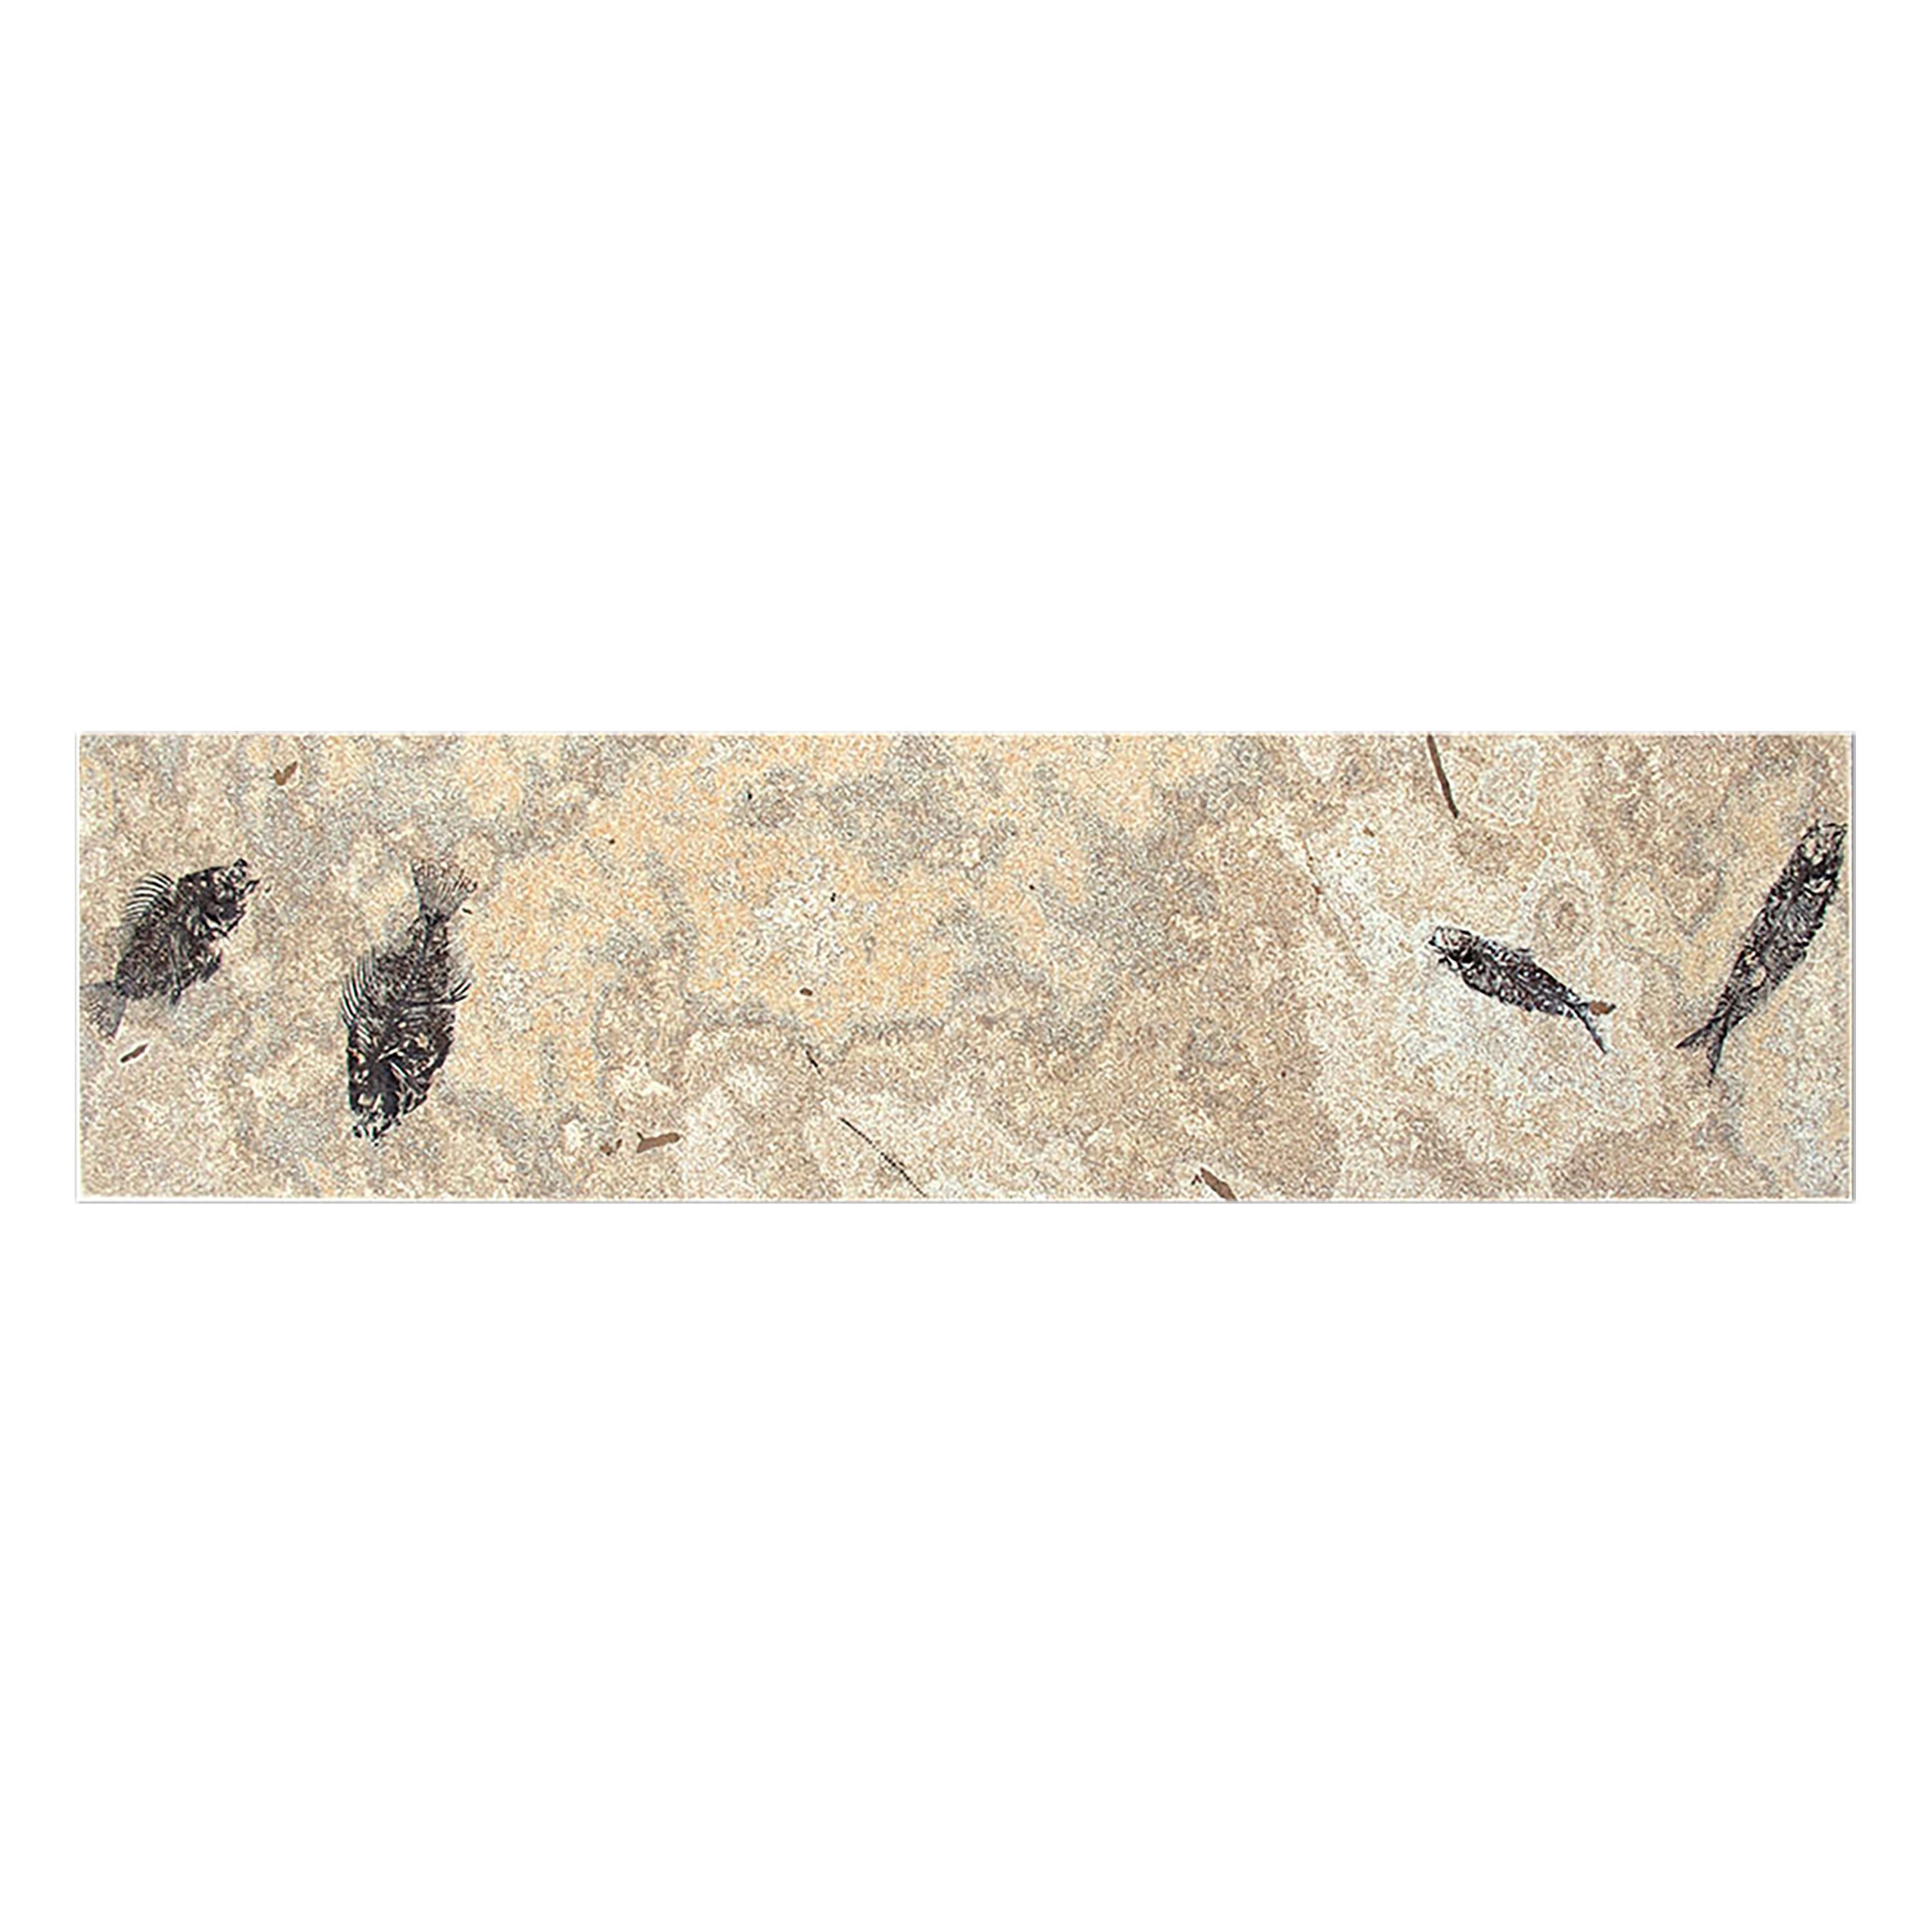 This elegant console table features four natural Eocene era fossil fish: two Cockerellites liops (formerly known as Priscacara) and two Knightia eocaena. These fossil fish date back about 50 million years, and they are forever preserved in a matrix